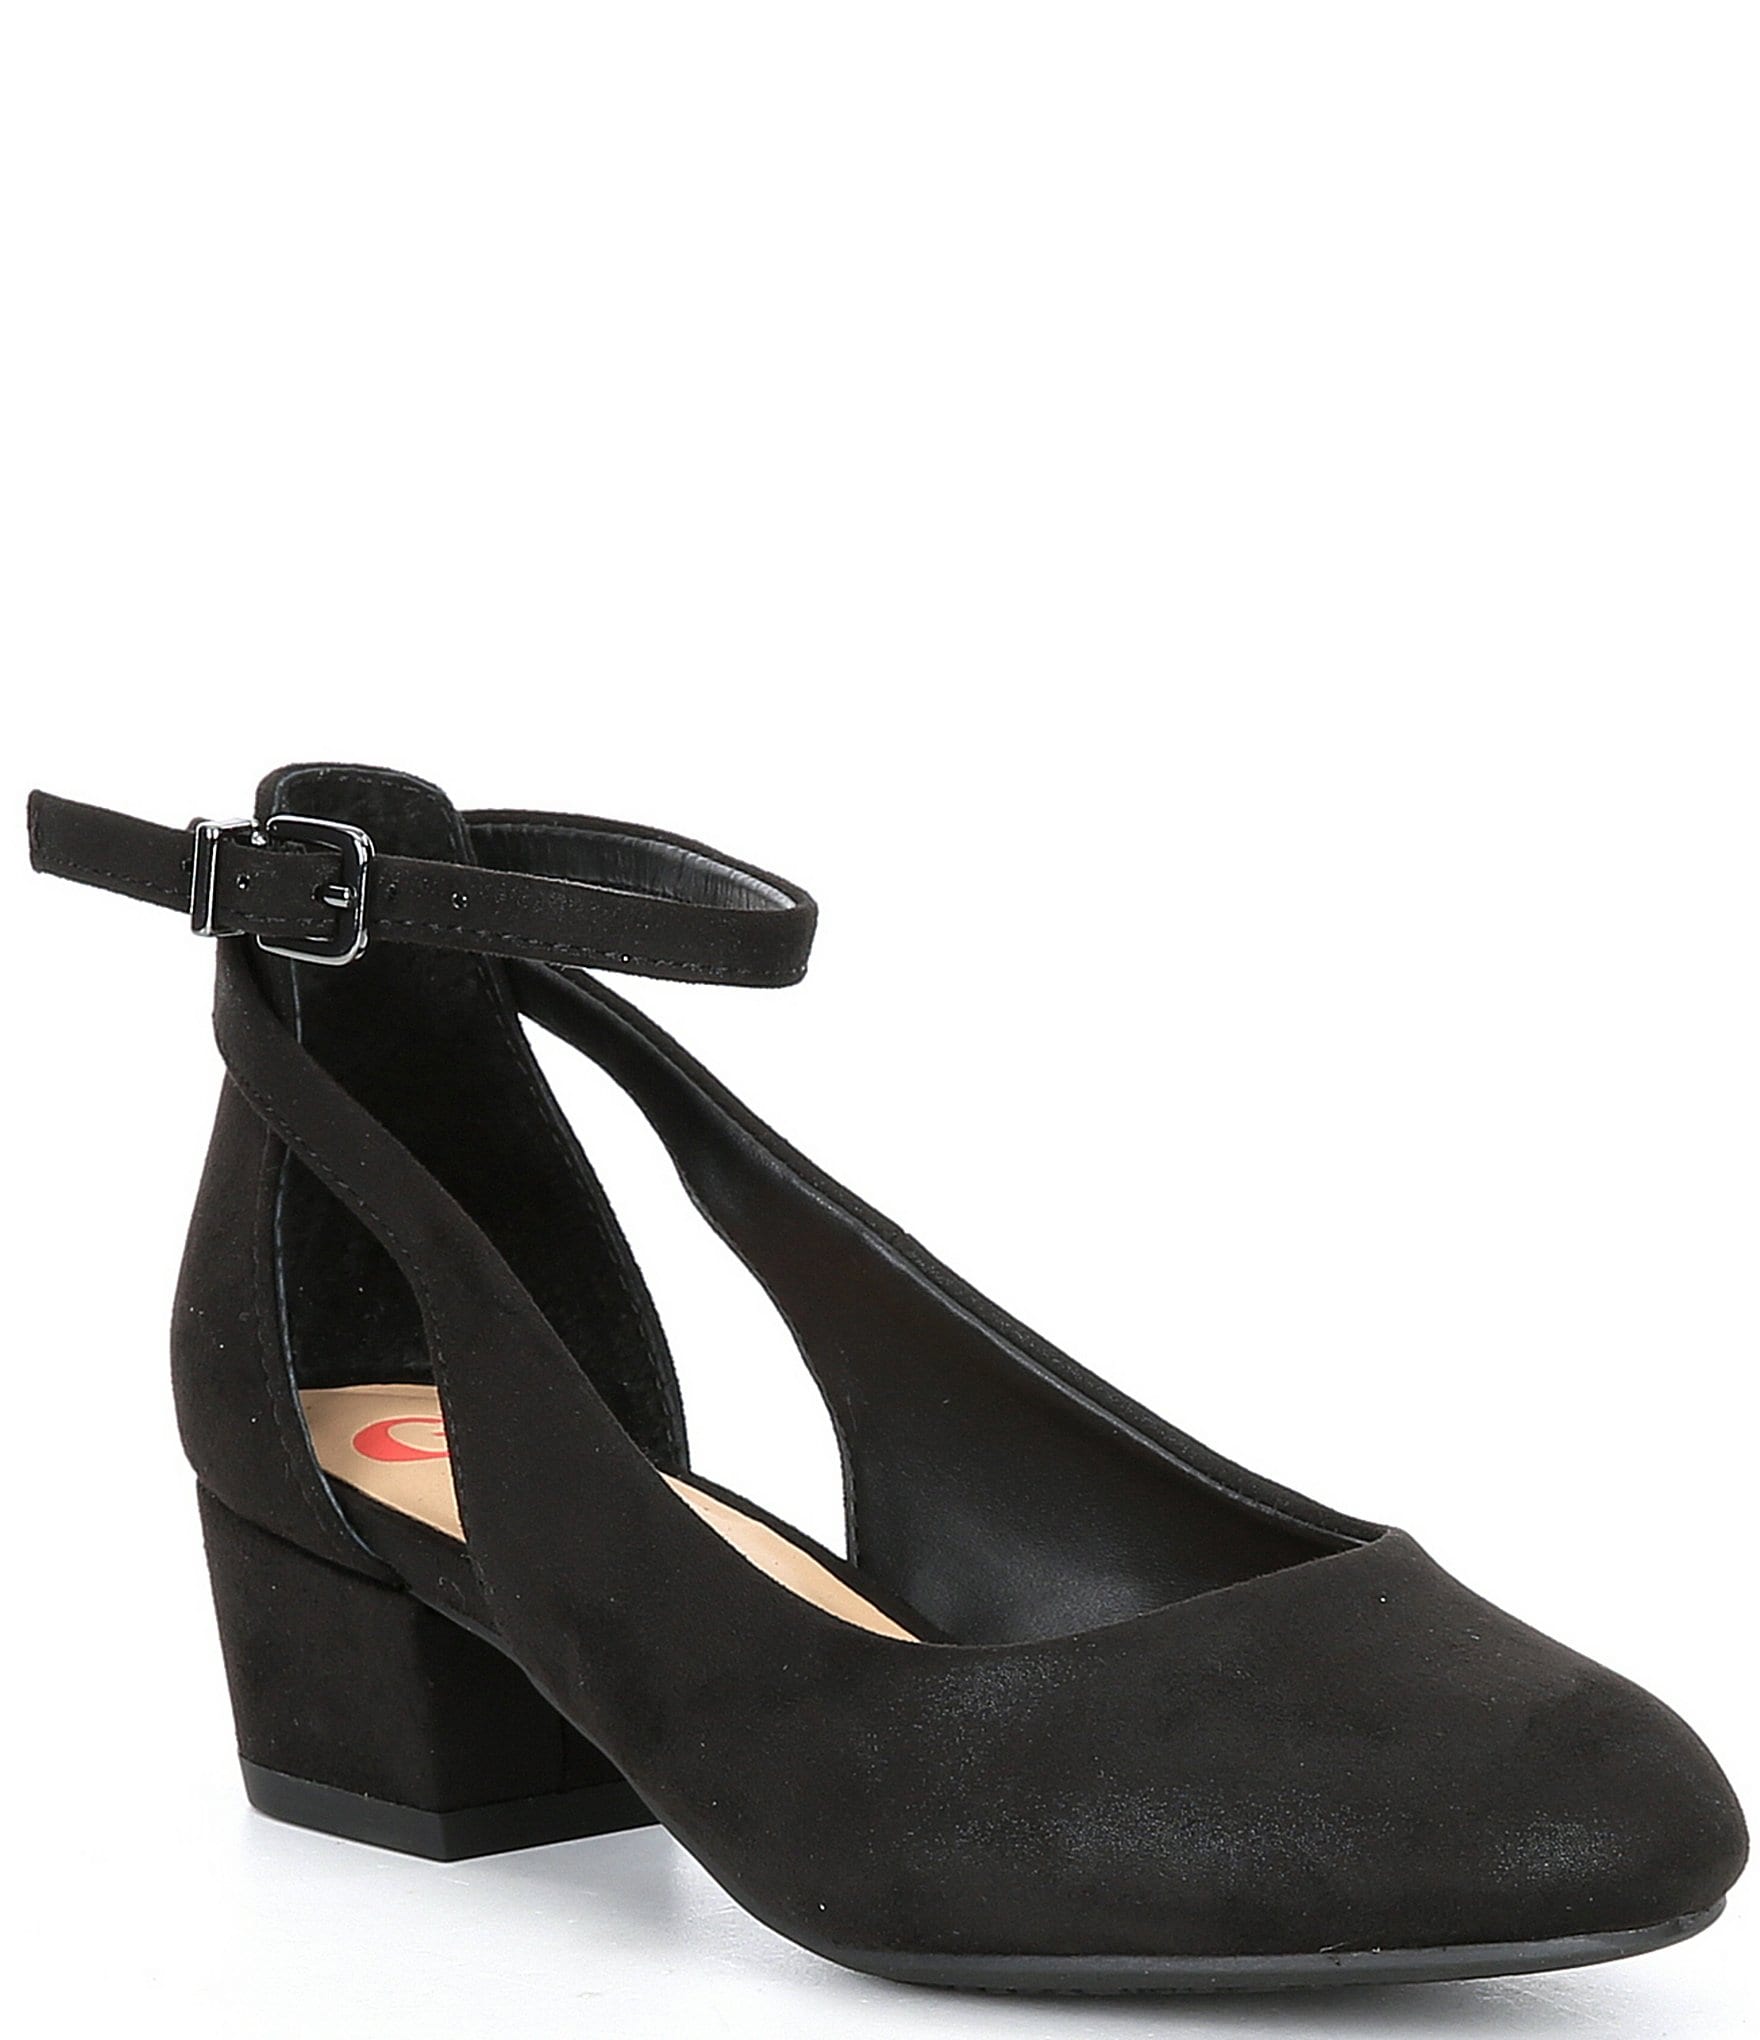 Black Party Shoes Heels for Kids party and dressing up-thanhphatduhoc.com.vn